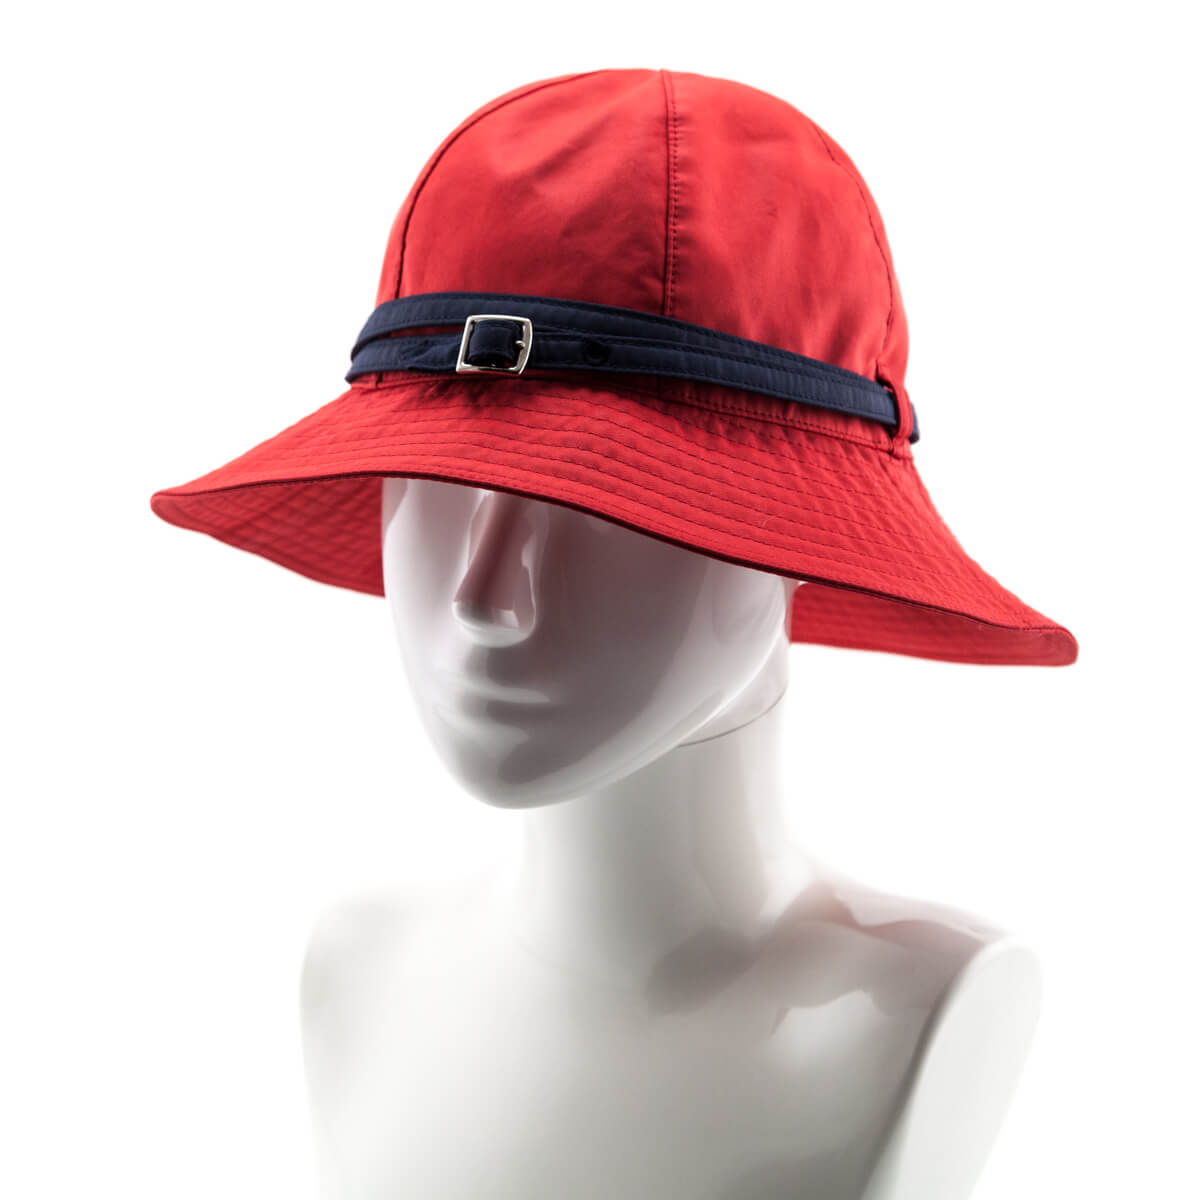 Hermes Red Woven Bucket Hat Size M - Love that Bag etc - Preowned Authentic Designer Handbags & Preloved Fashions